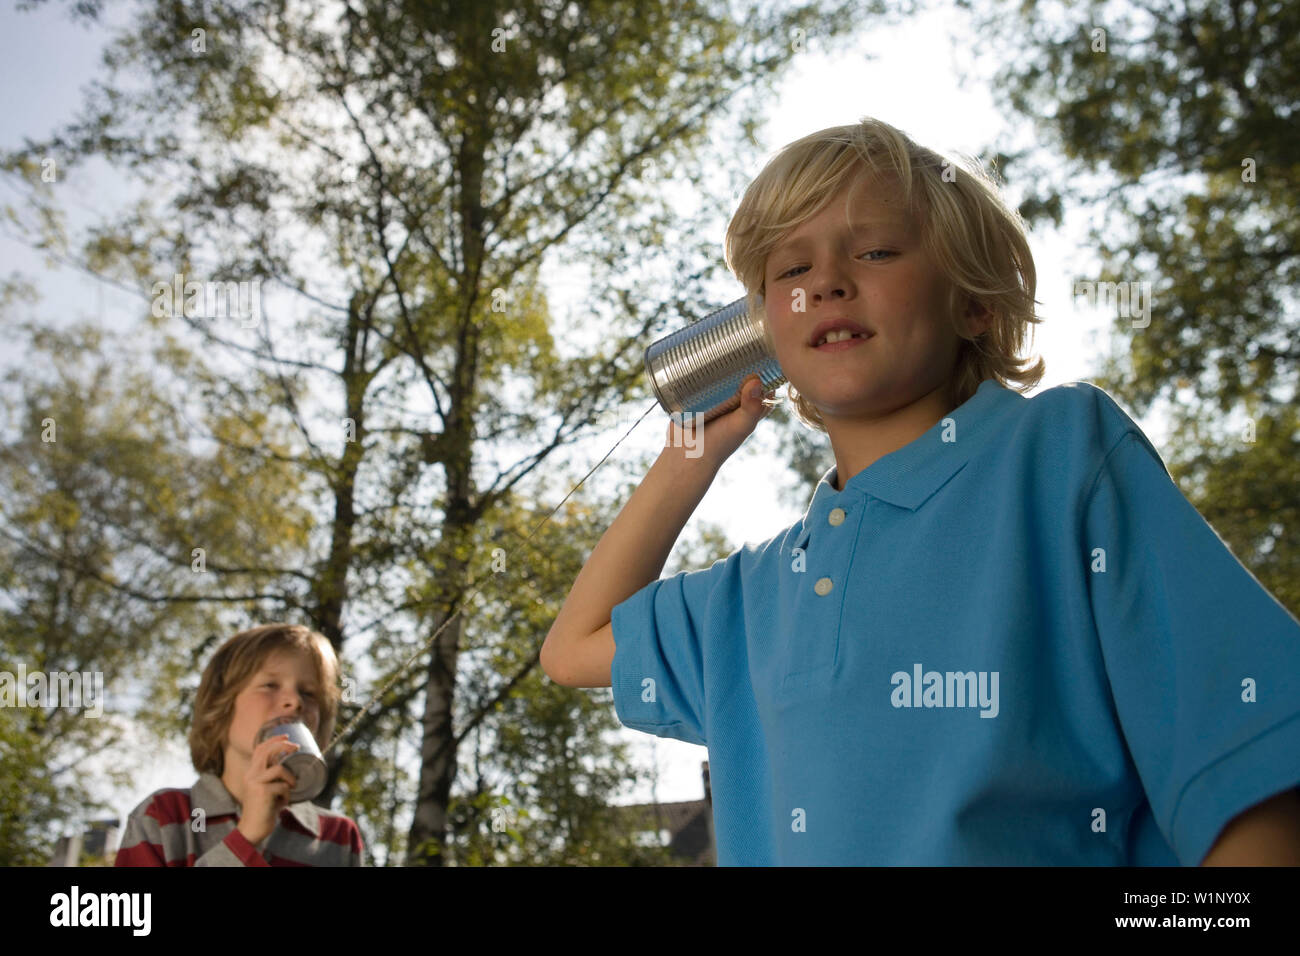 Two boys playing with a tin can phone, children's birthday party Stock Photo